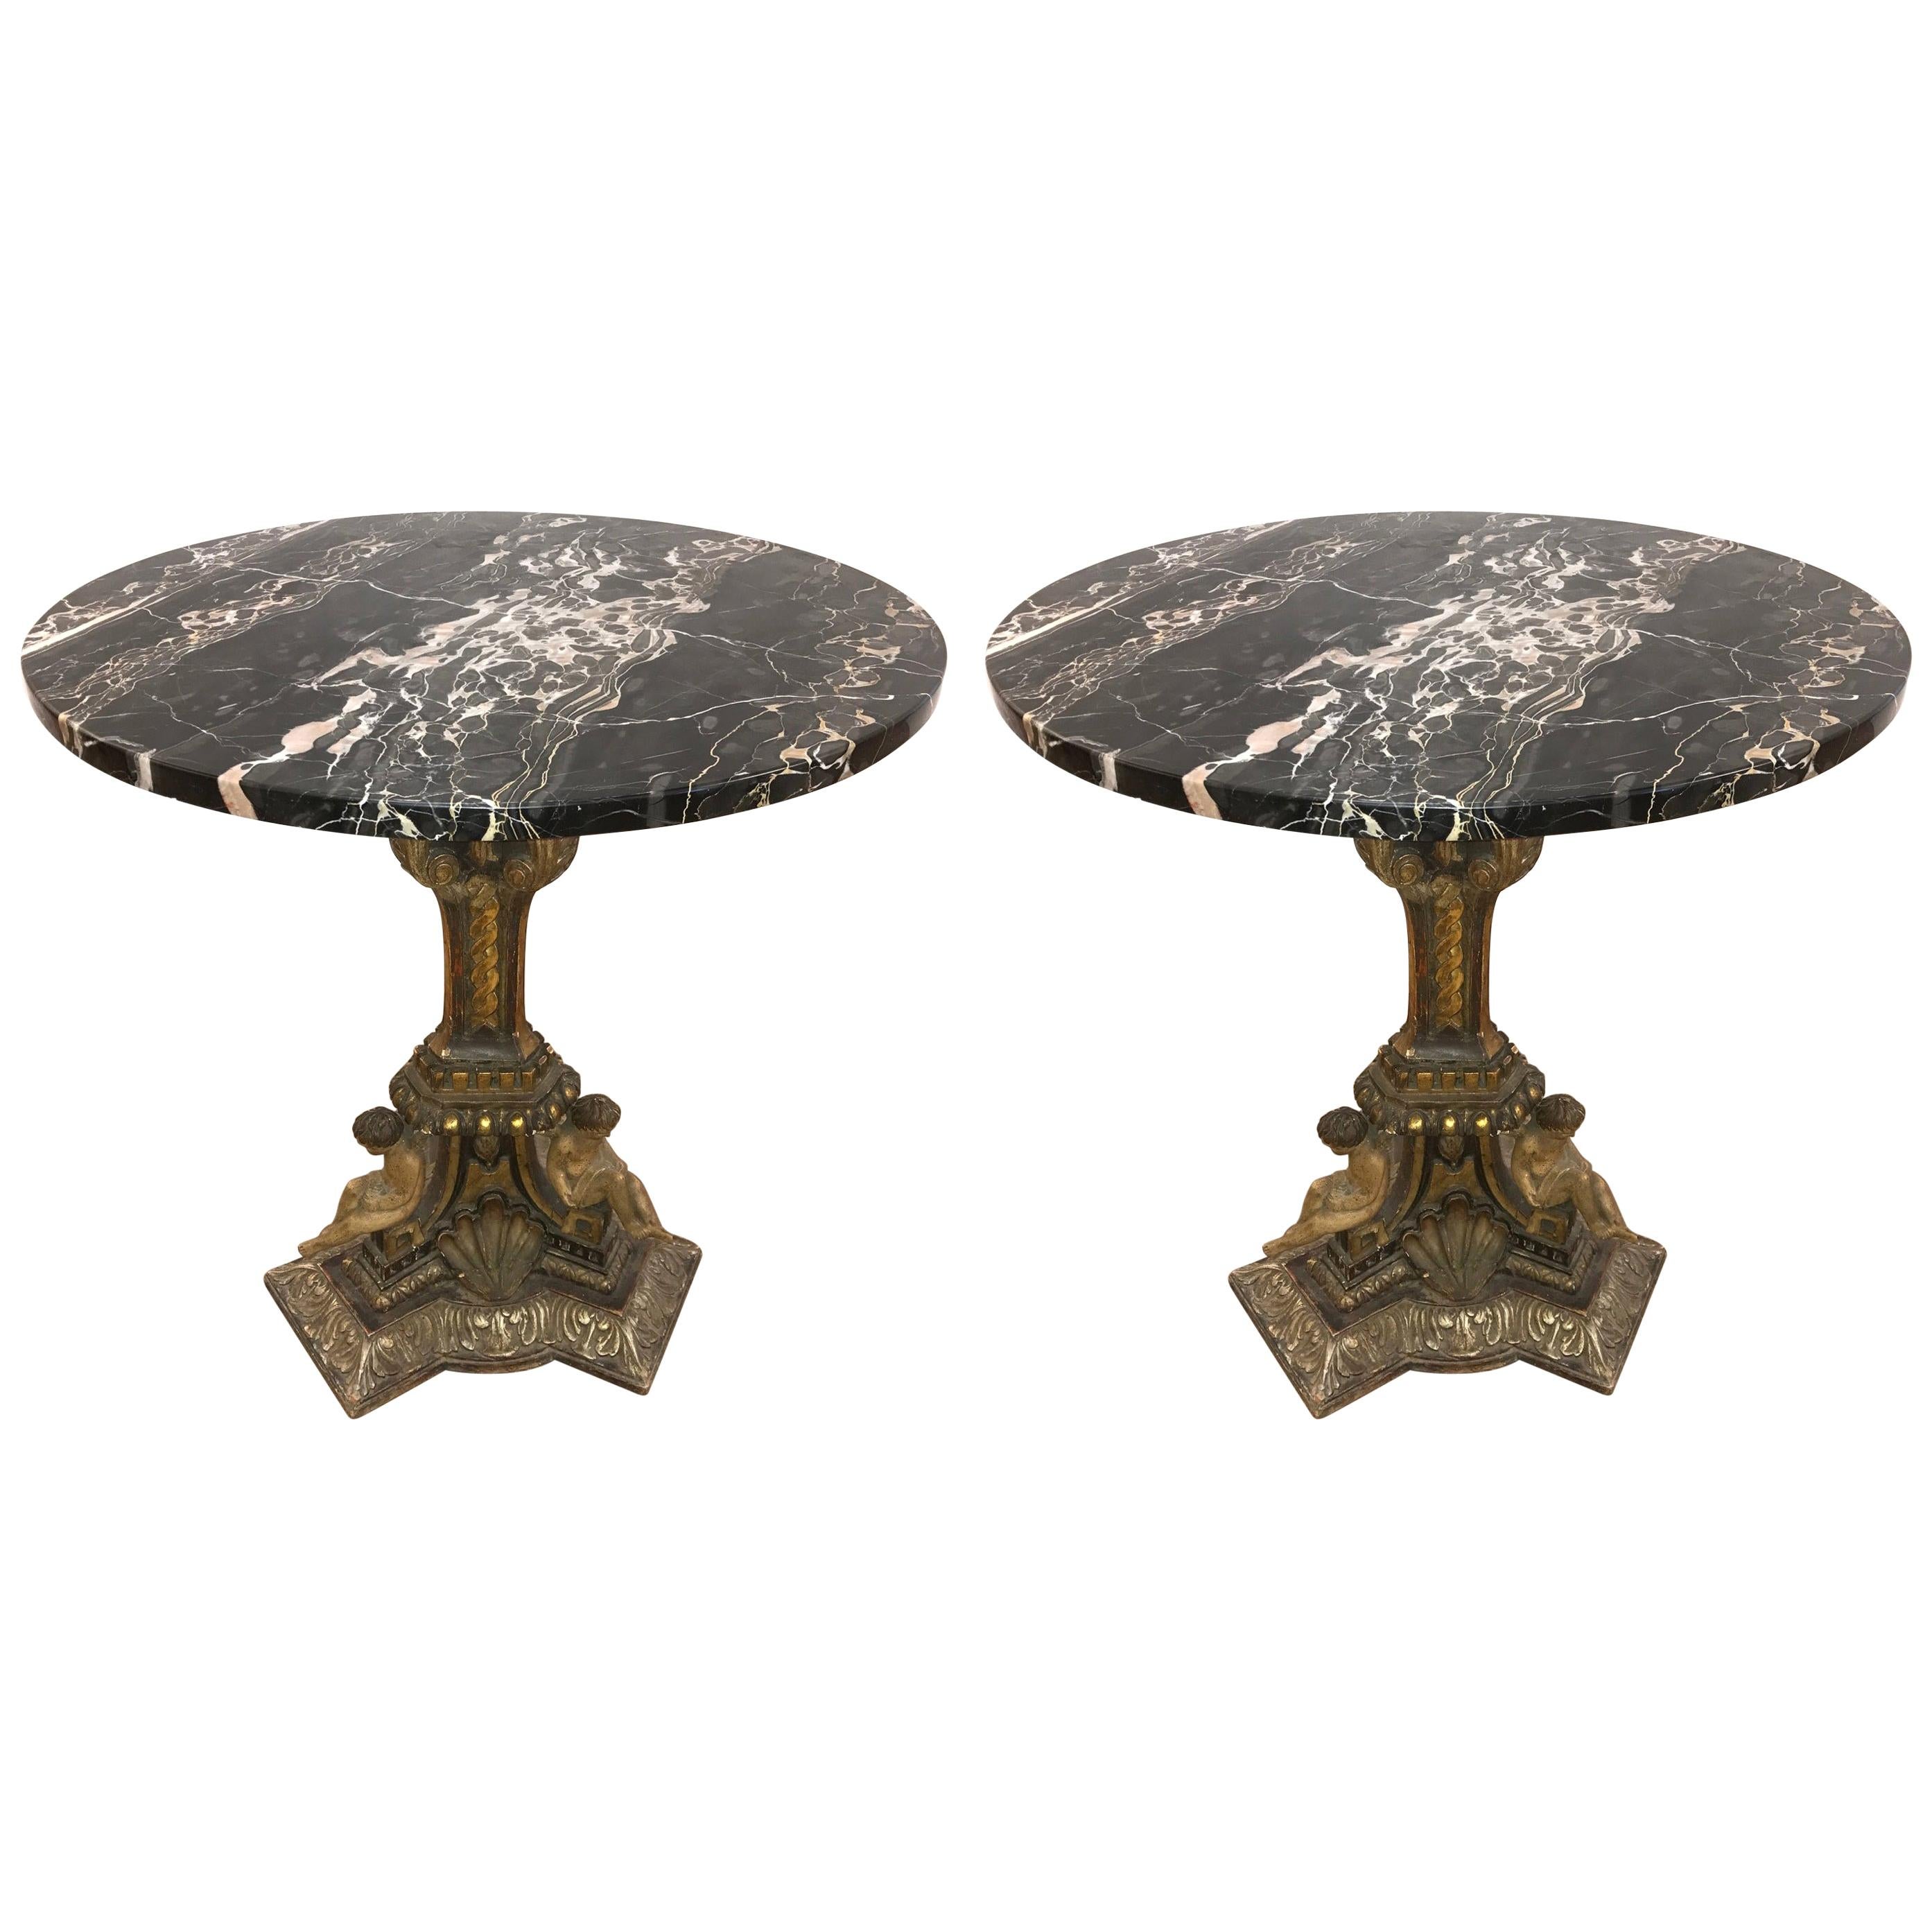 Pair of 19th Century Italian Giltwood Marble-Top Pedestal Tables For Sale